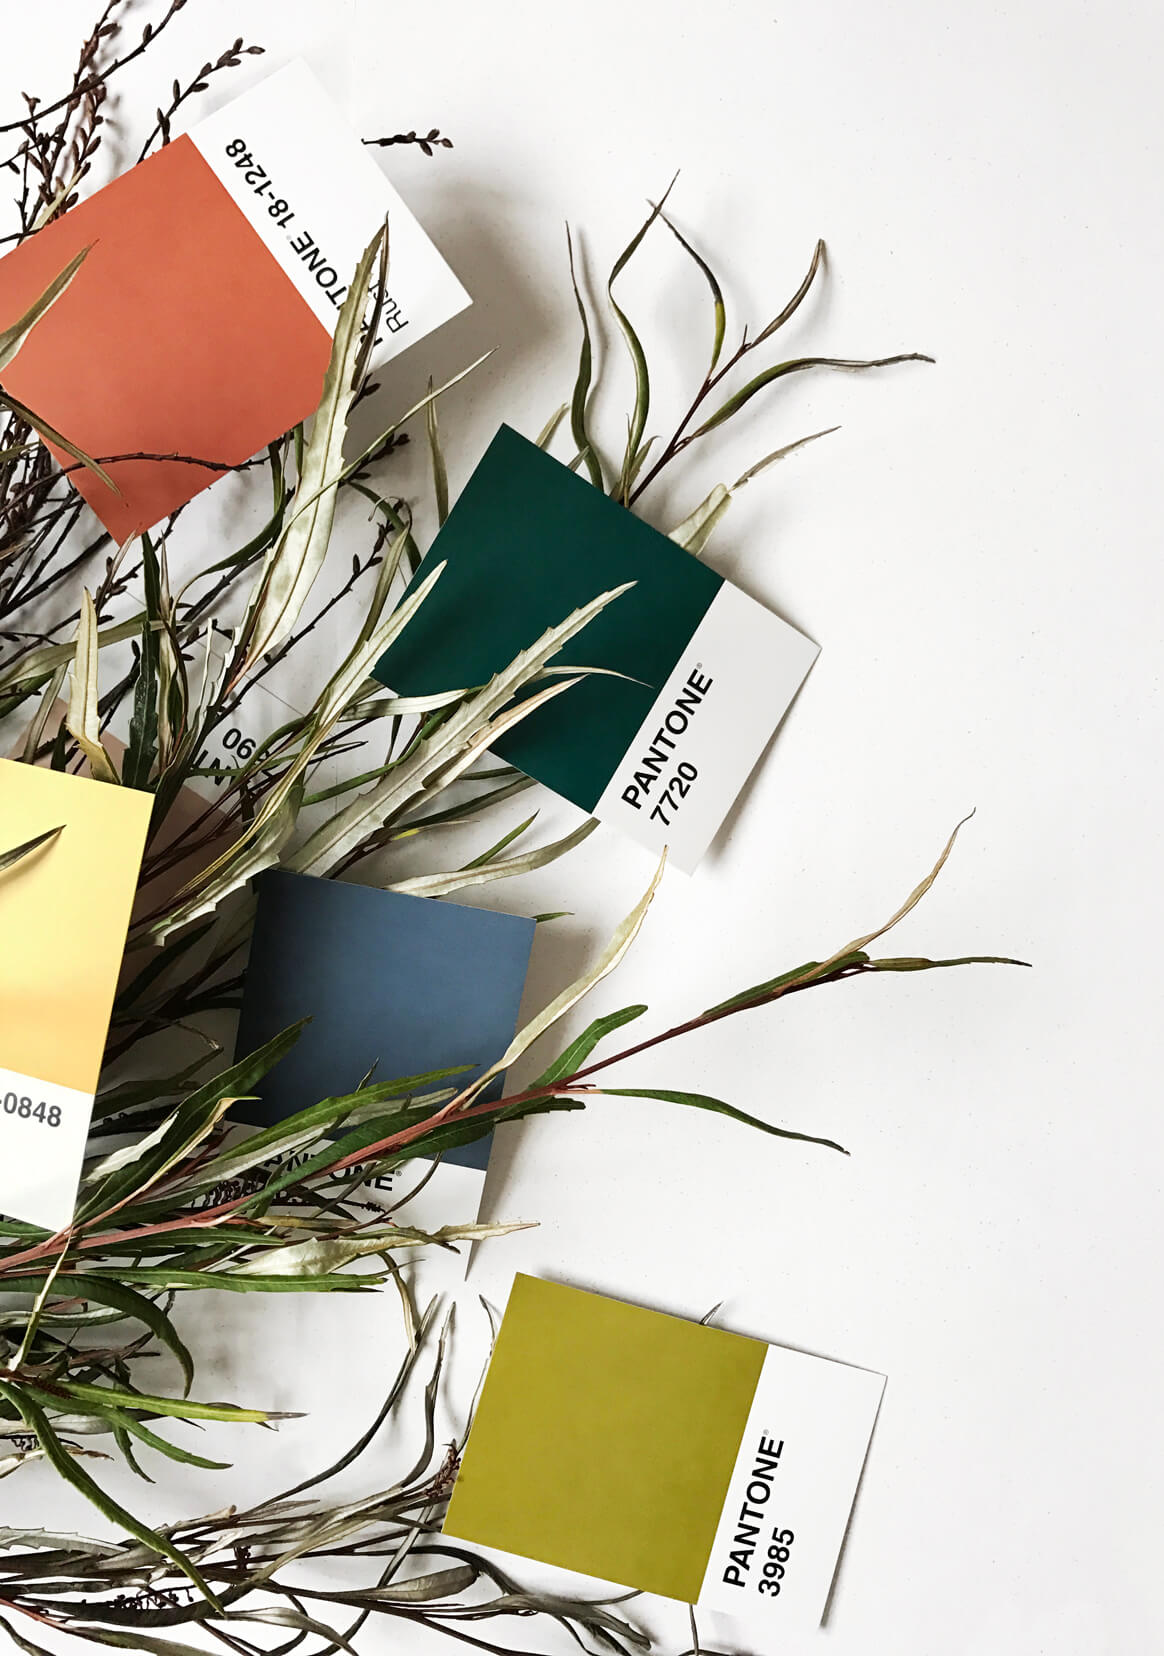 Pantone colour cards spread among leaves